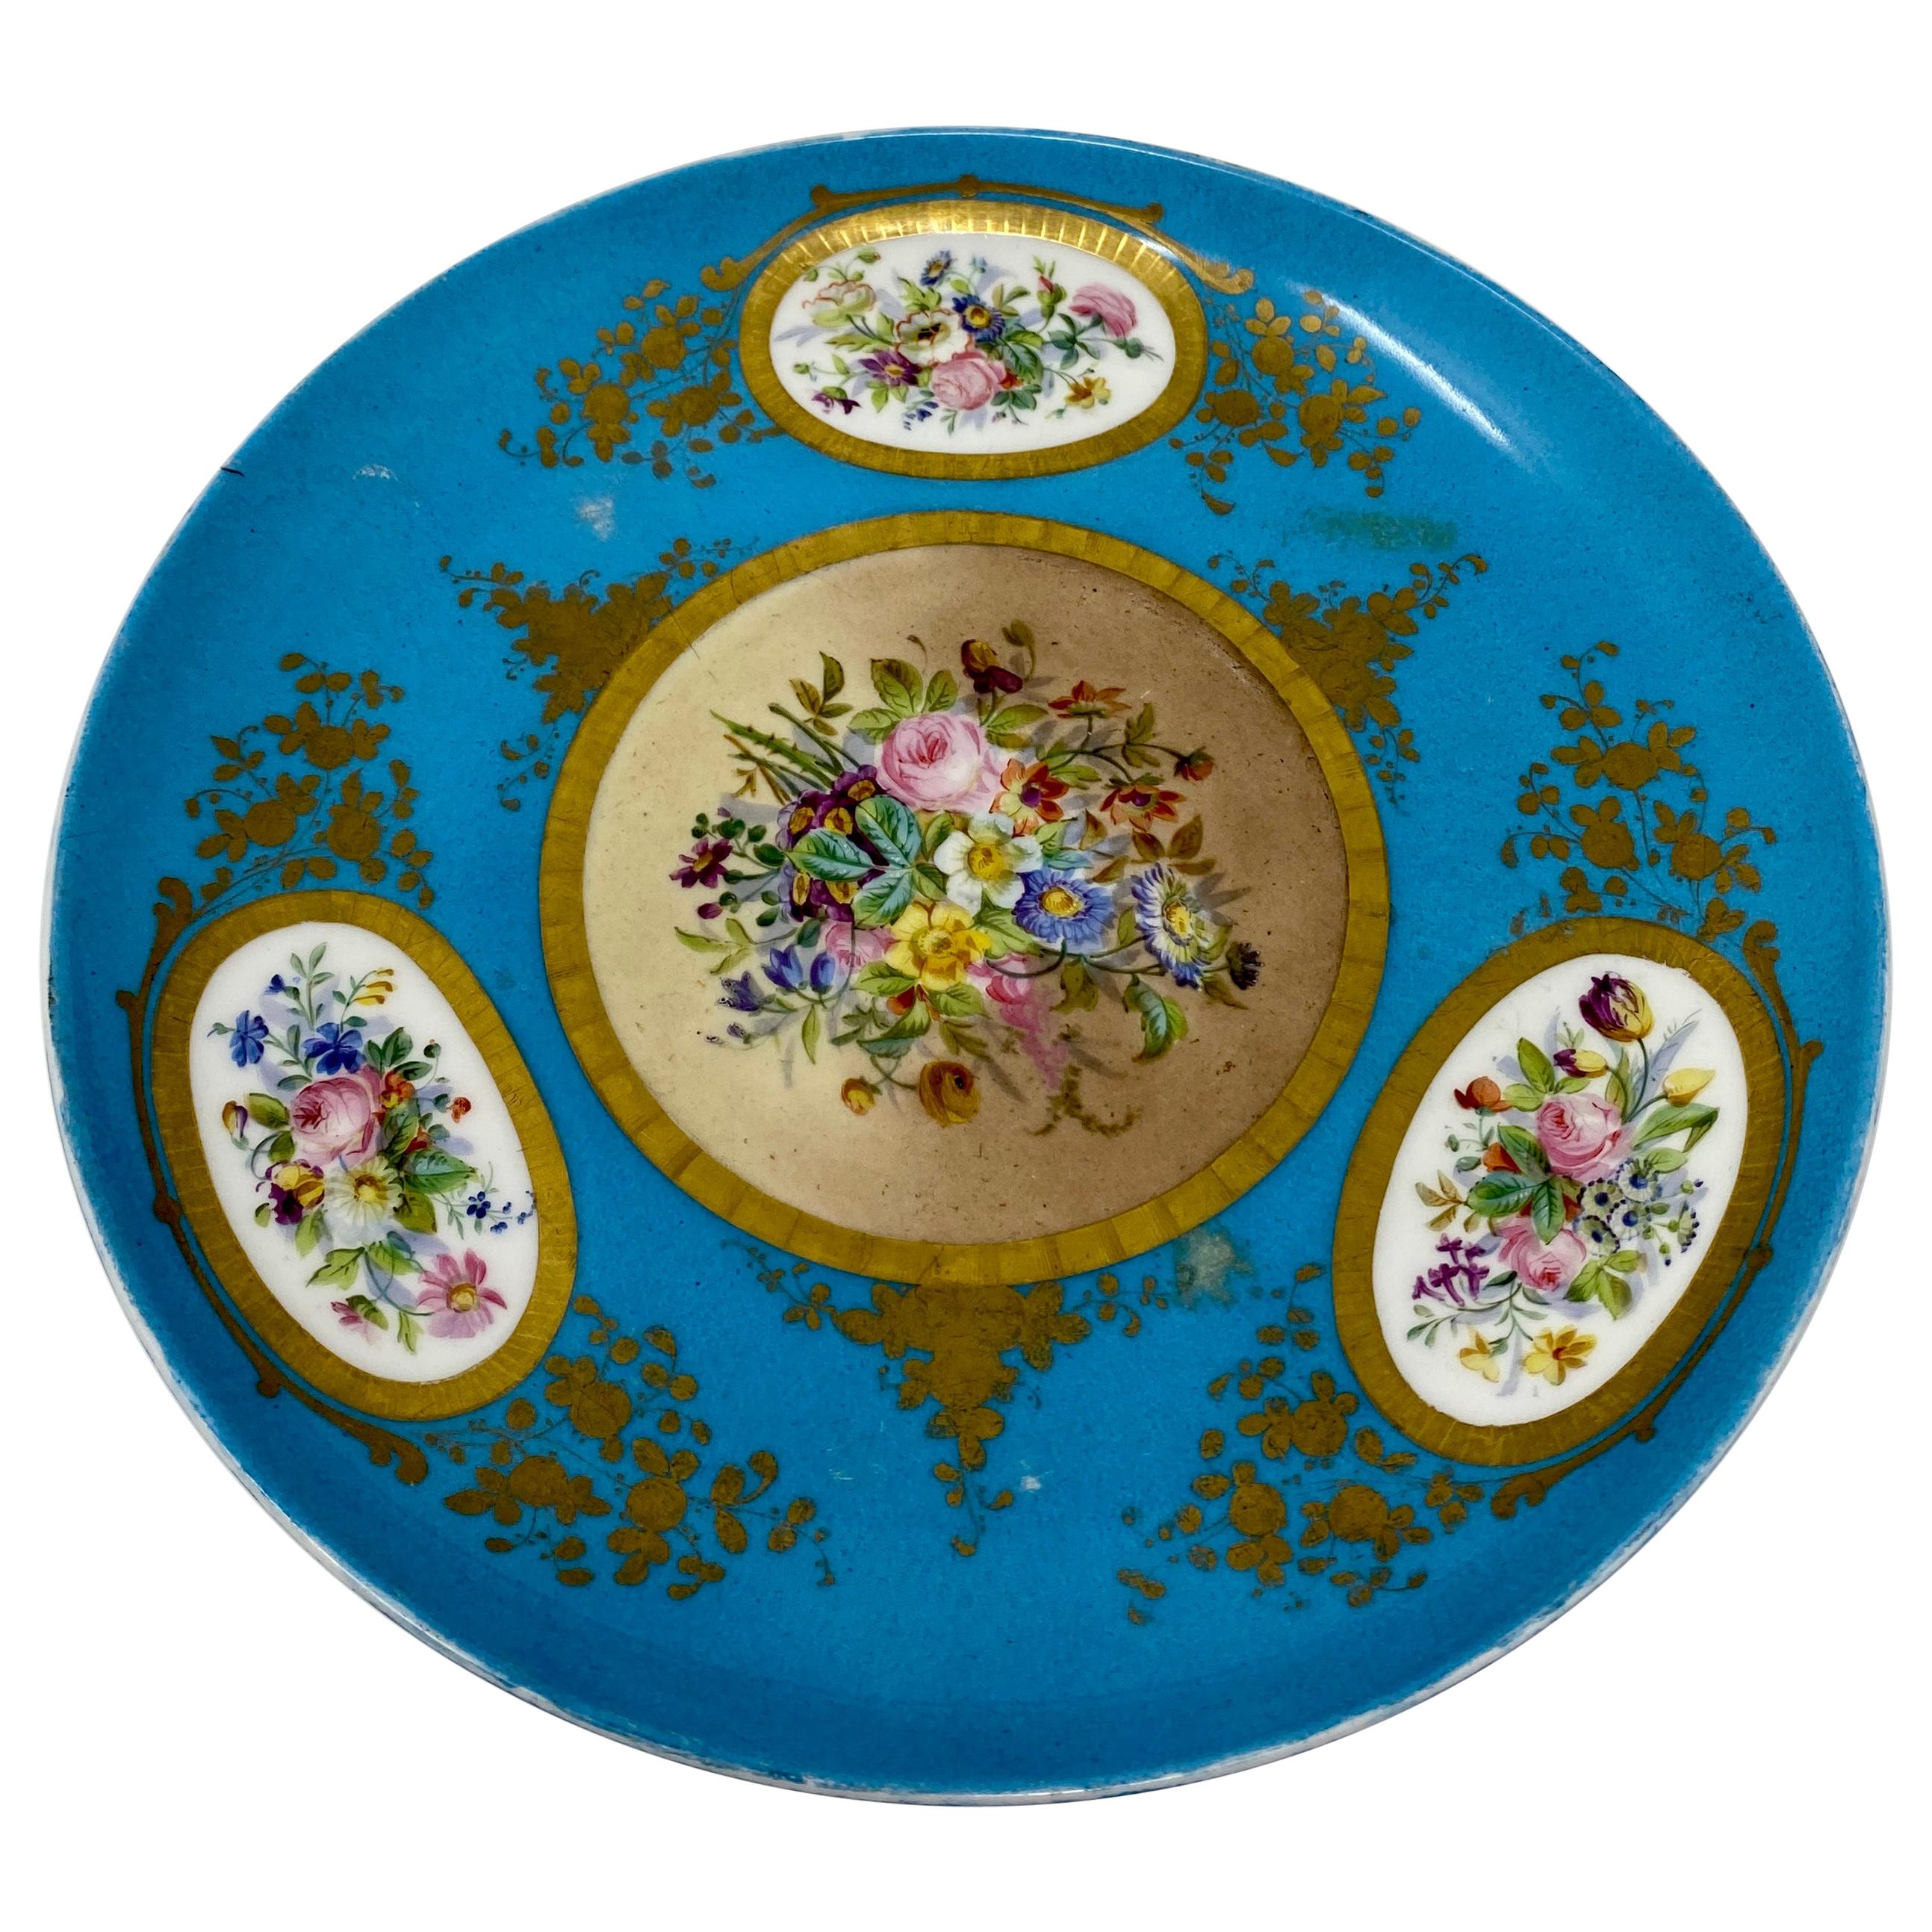 Antique French Early 19th Century Sèvres Plate, circa 1820-1830